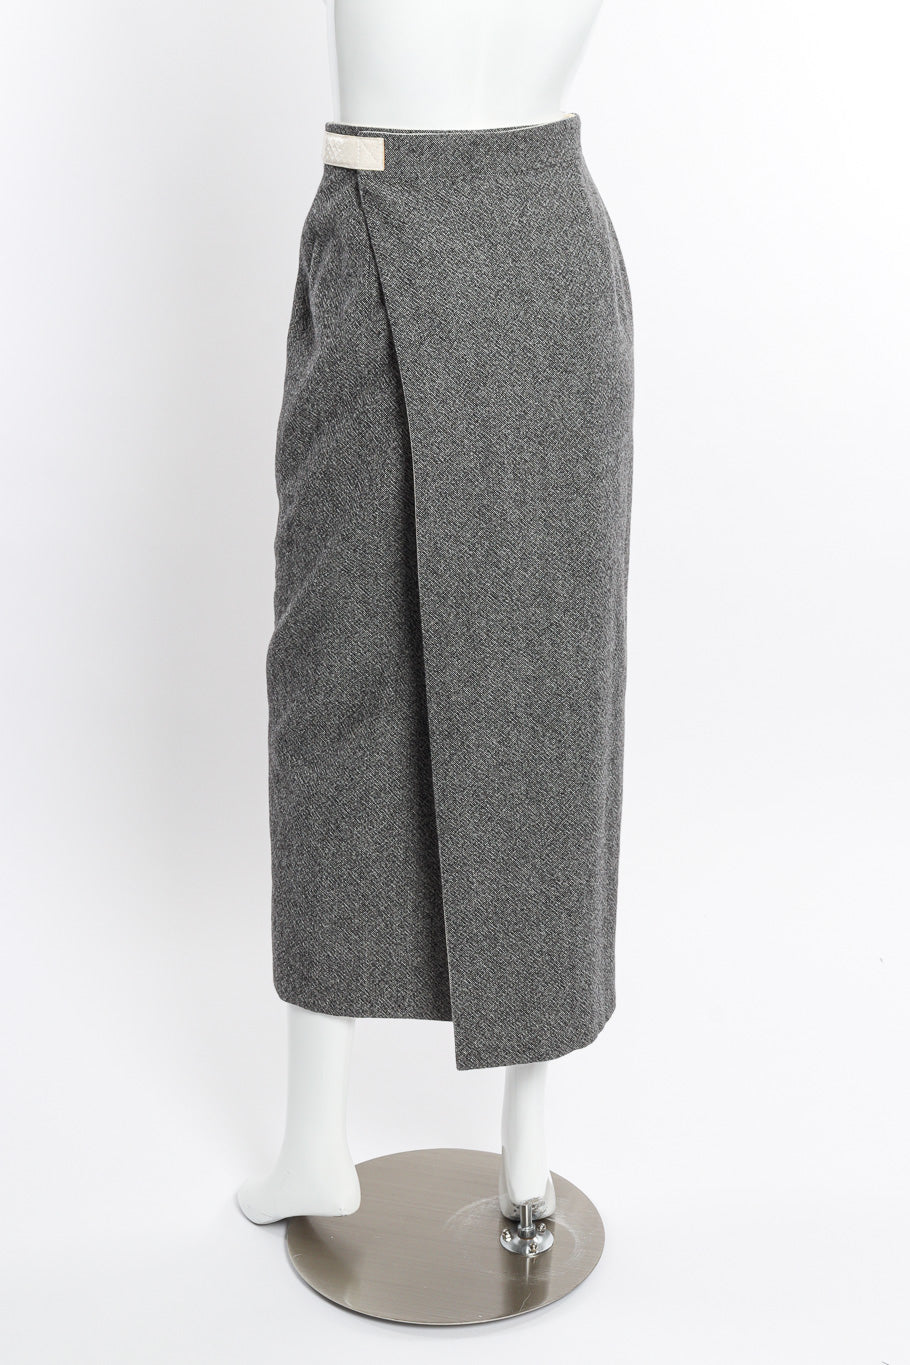 Wool Jacket & Wrap Skirt Suit by Christian Dior on mannequin skirt only back @recessla